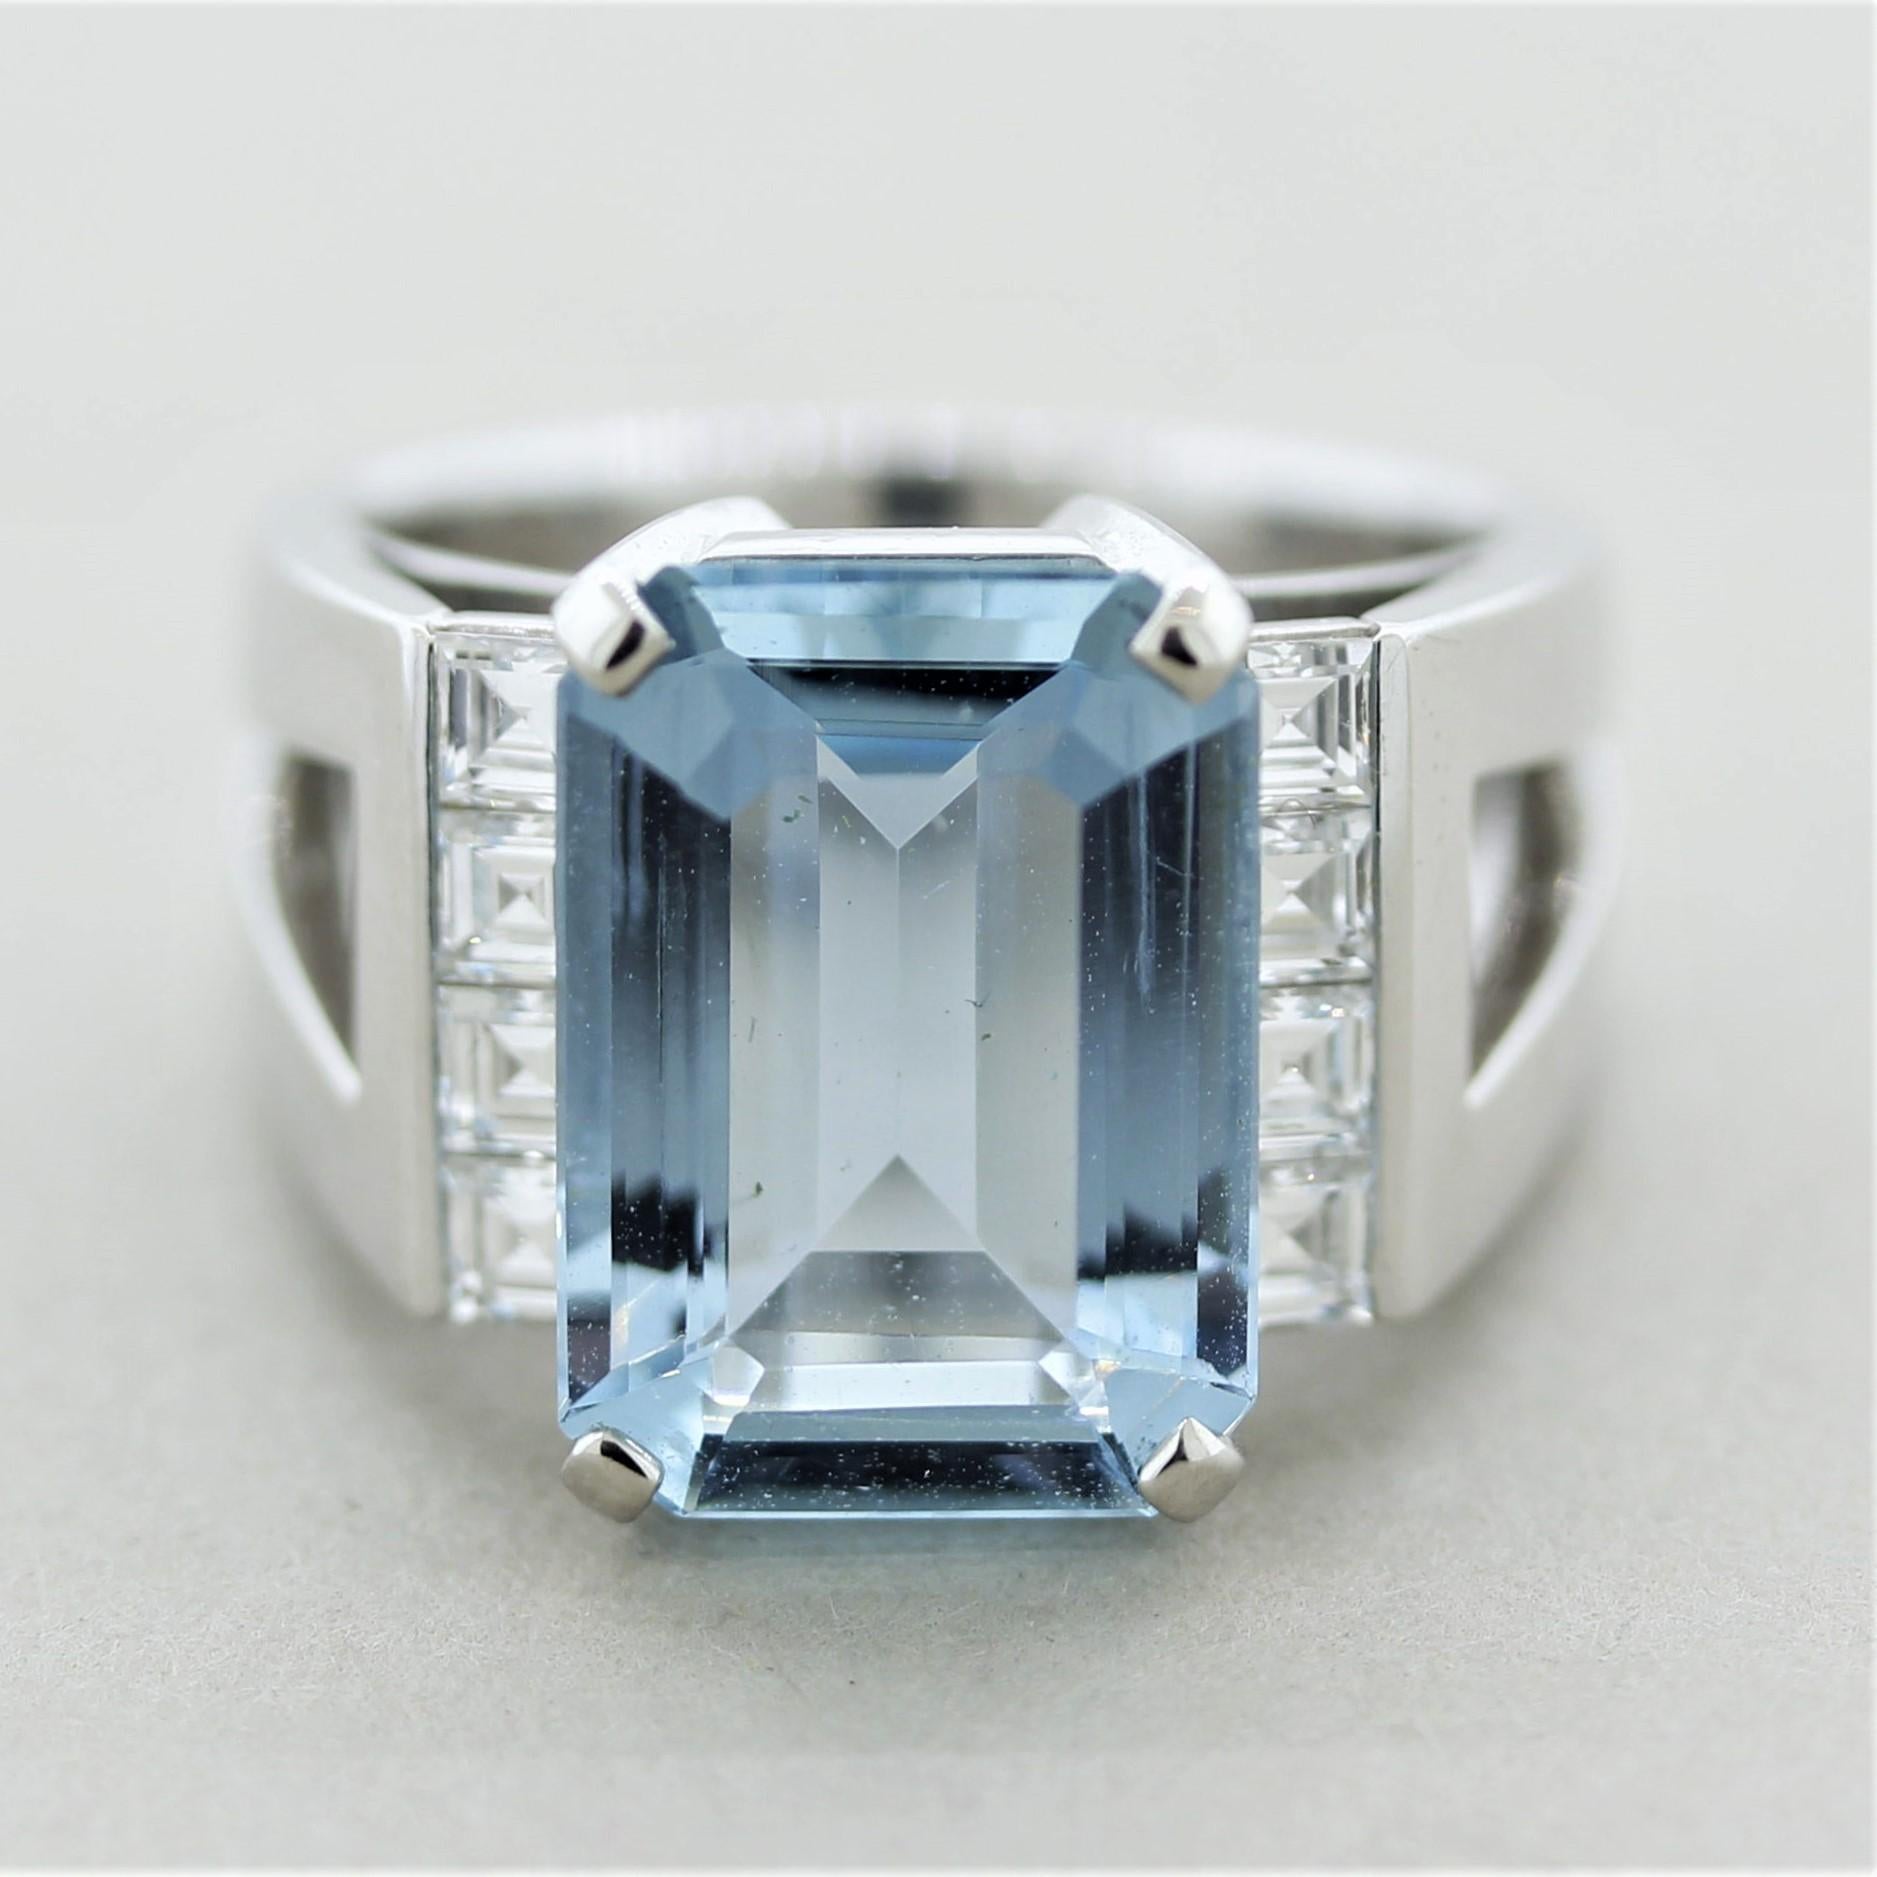 A luscious ring featuring a 5 carat aquamarine gem with a bright and beautiful sea-blue color. It is accented by 8 perfect asscher-cut diamonds which are channel-set on the sides of the aquamarine. Hand-fabricated in platinum, this heavy ring is